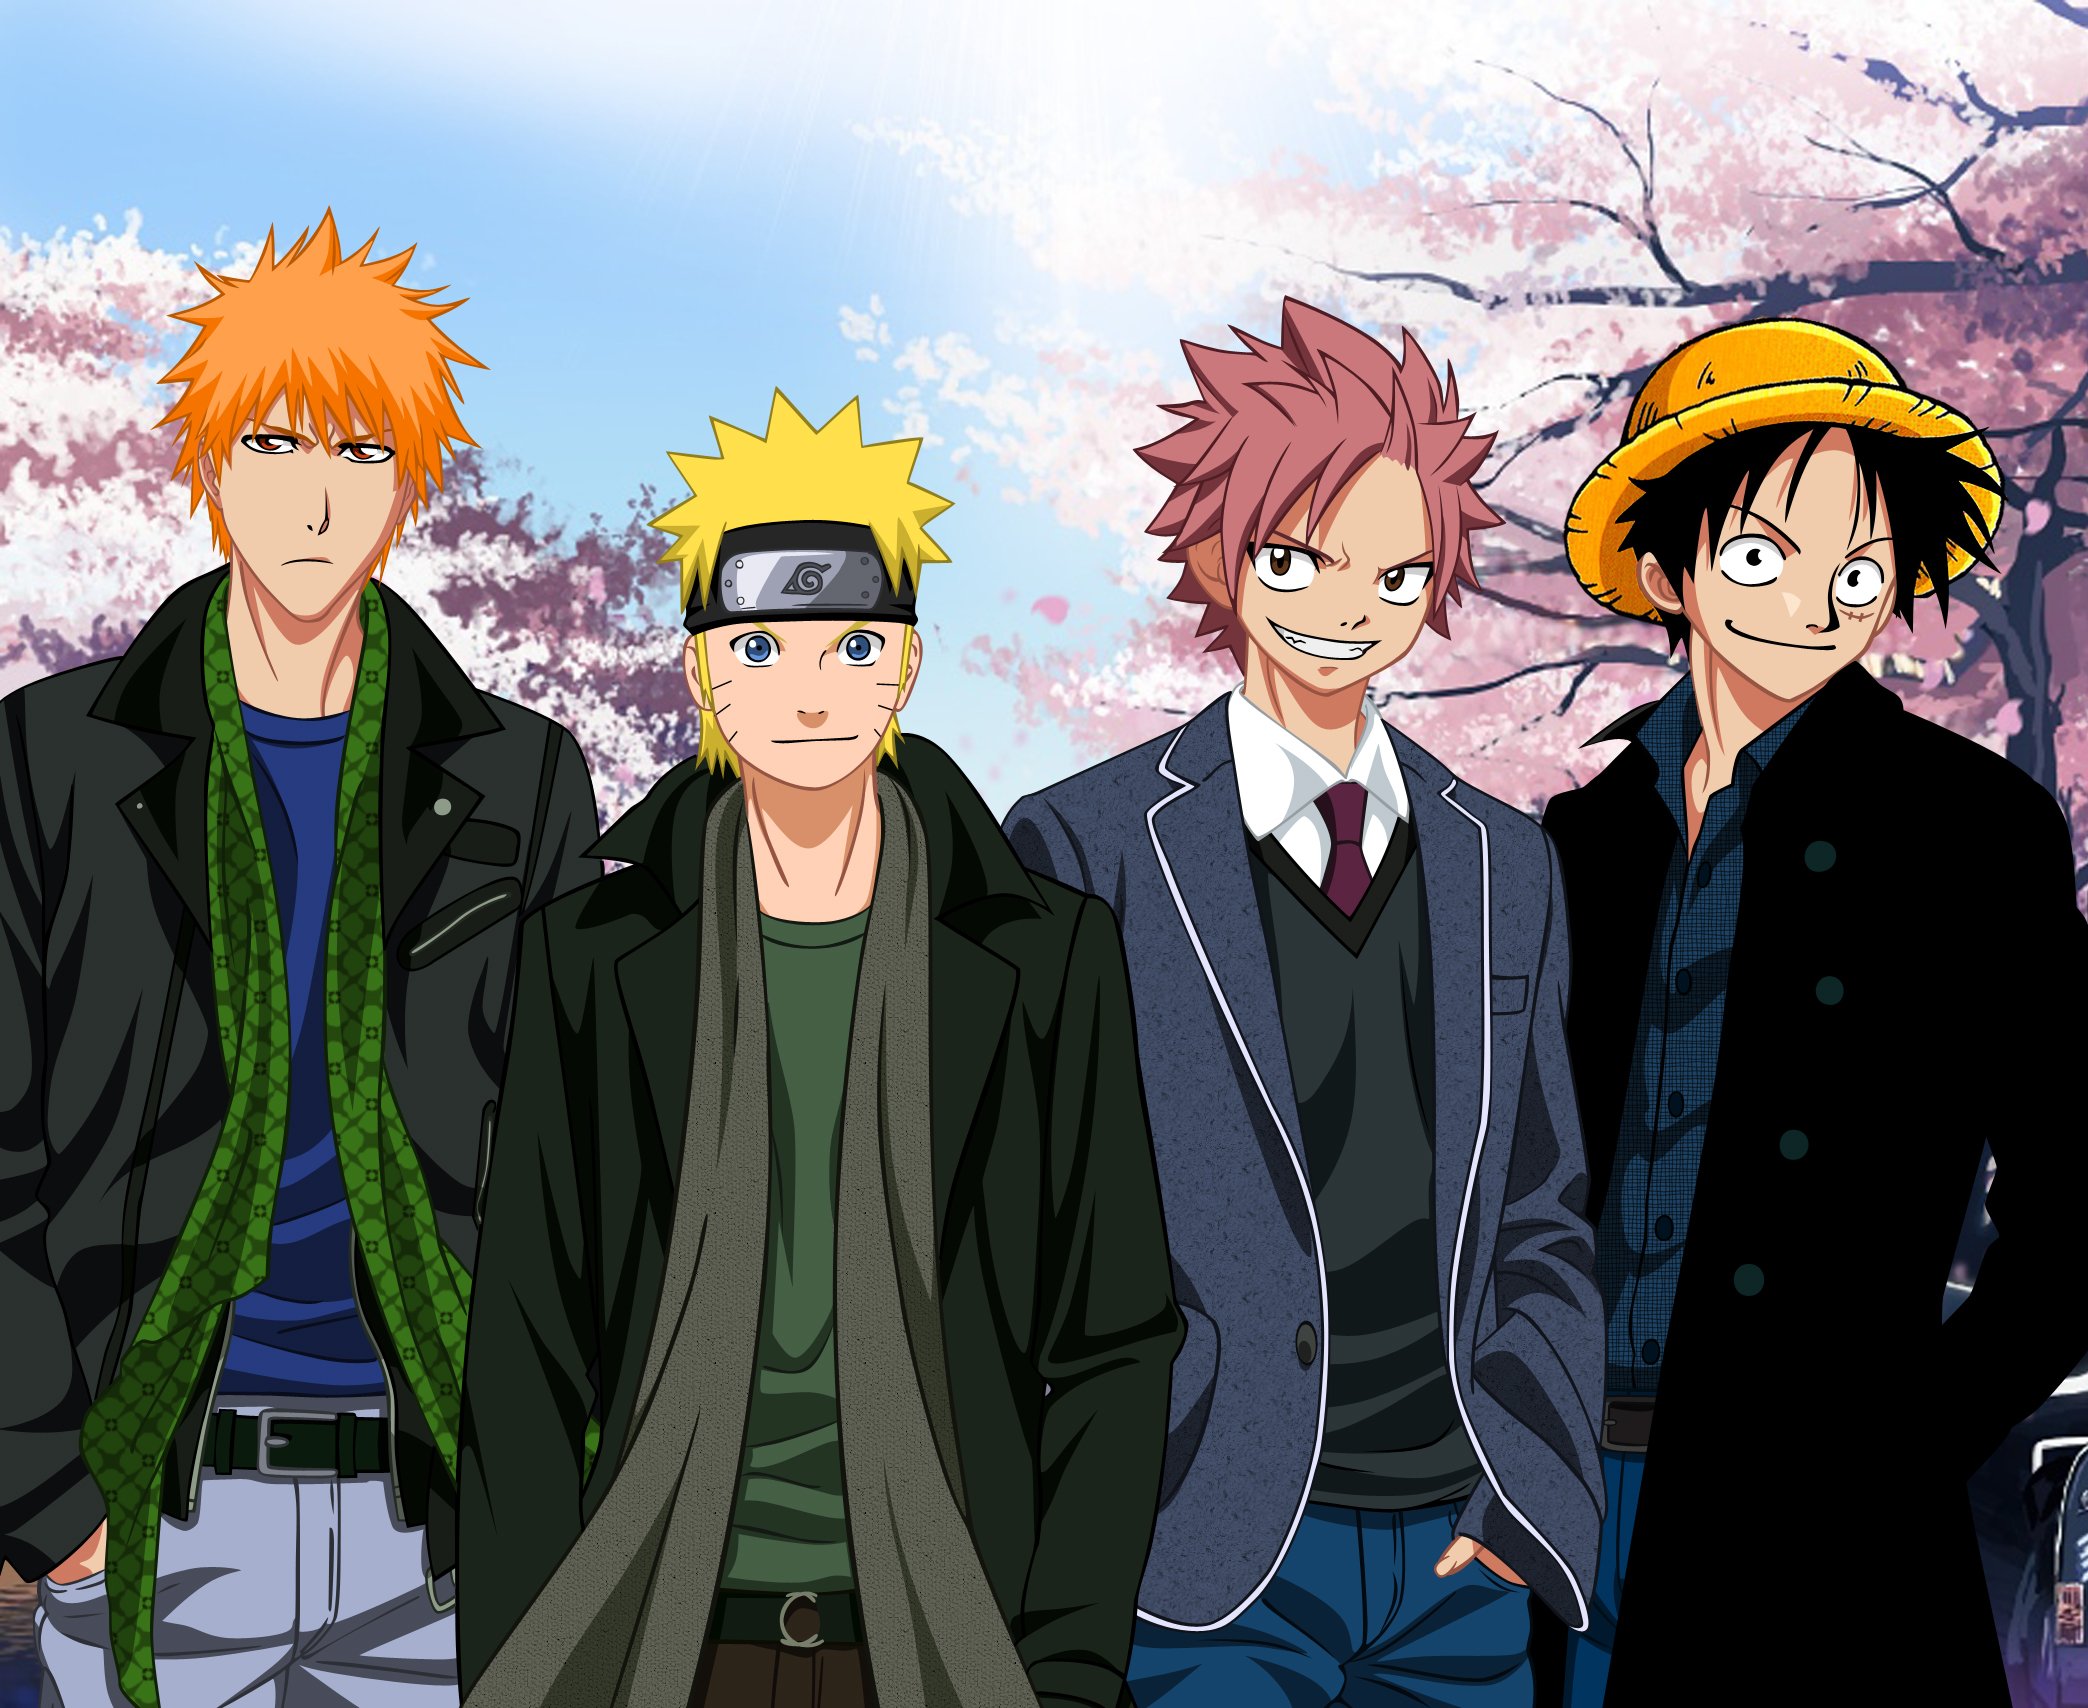 Anime Series Naruto Bleach Fairy Tail One Piece Charcters Boys Wallpapers Hd Desktop And Mobile Backgrounds